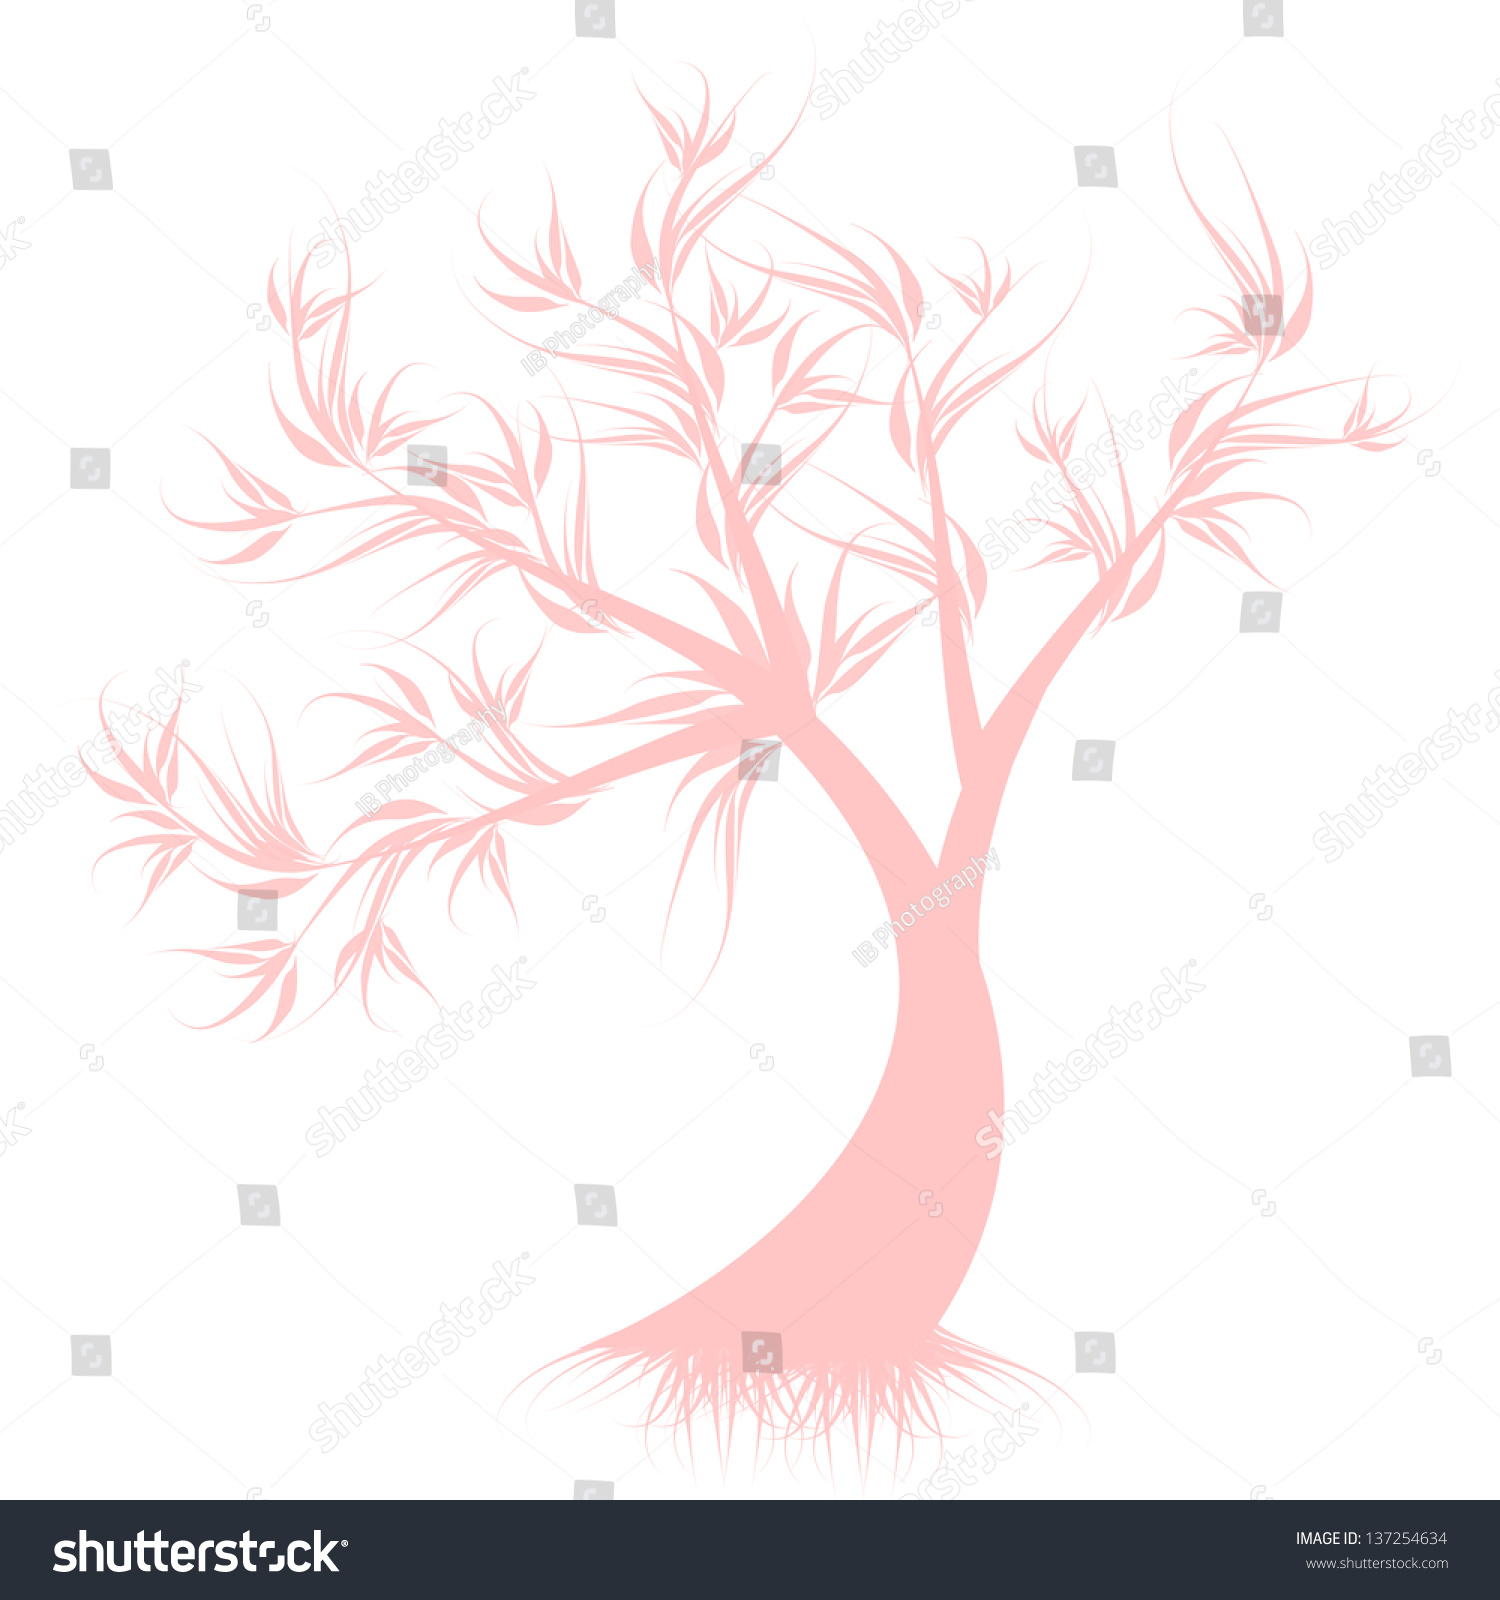 Art Tree Silhouette Isolated On White Stock Vector Royalty Free